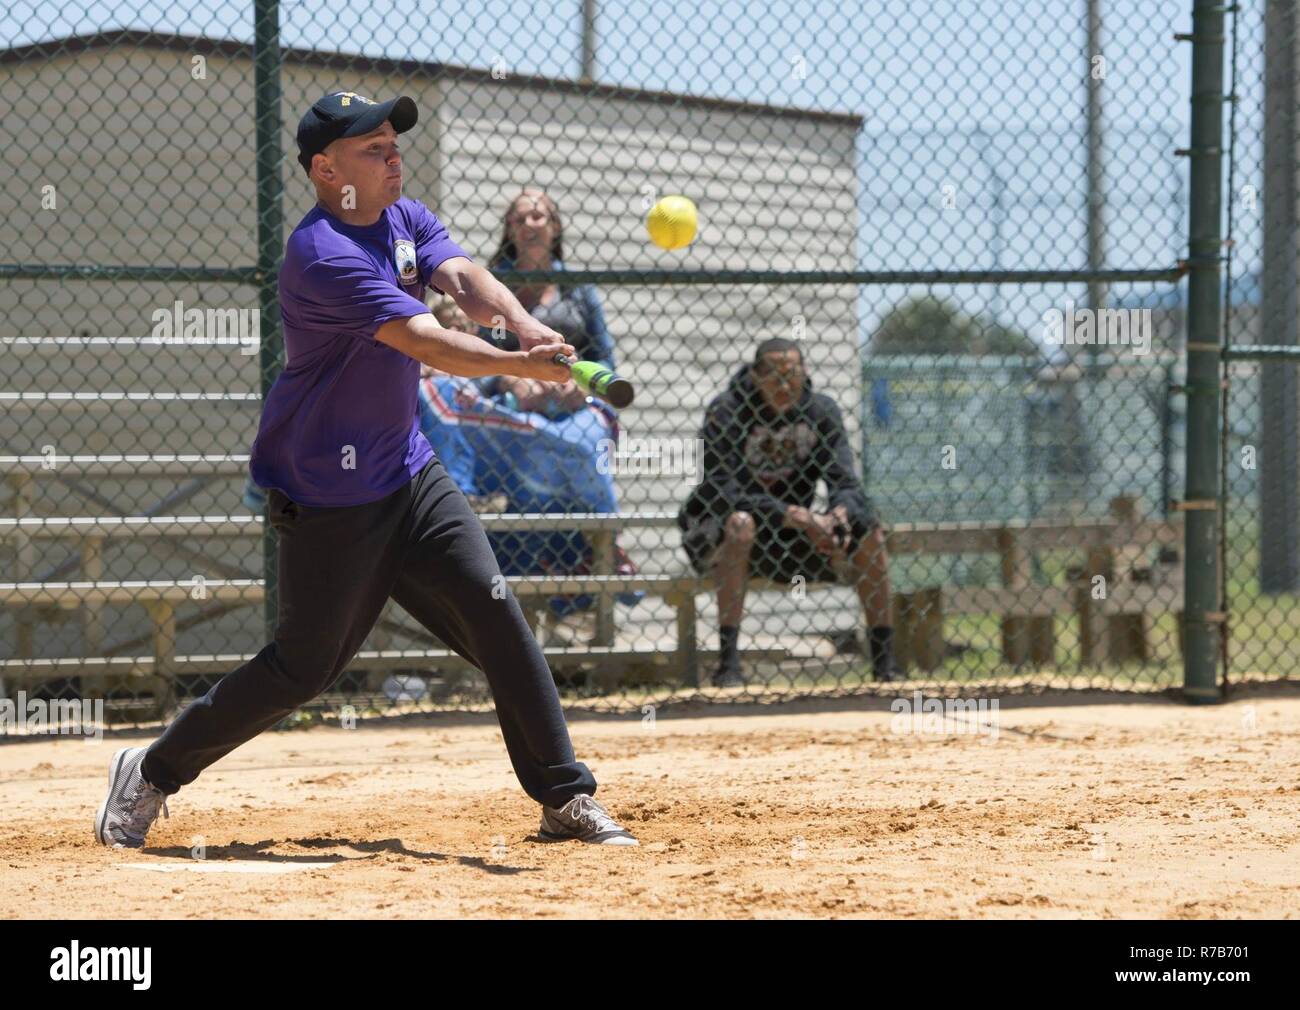 MAYPORT, Fla. (May 5, 2017) – Logistics Specialist 2nd Class Kevin Ortega swings at a pitch during a softball game between the amphibious assault ship USS Iwo Jima’s (LHD 7) Wardroom and Second Class Petty Officer Association (SCPOA).  The game was held as part of a tournament between the ship’s Wardroom, First Class Petty Officer Association, Chief Petty Officer Association & SCPOA to build camaraderie and morale among the ship’s crew. Stock Photo